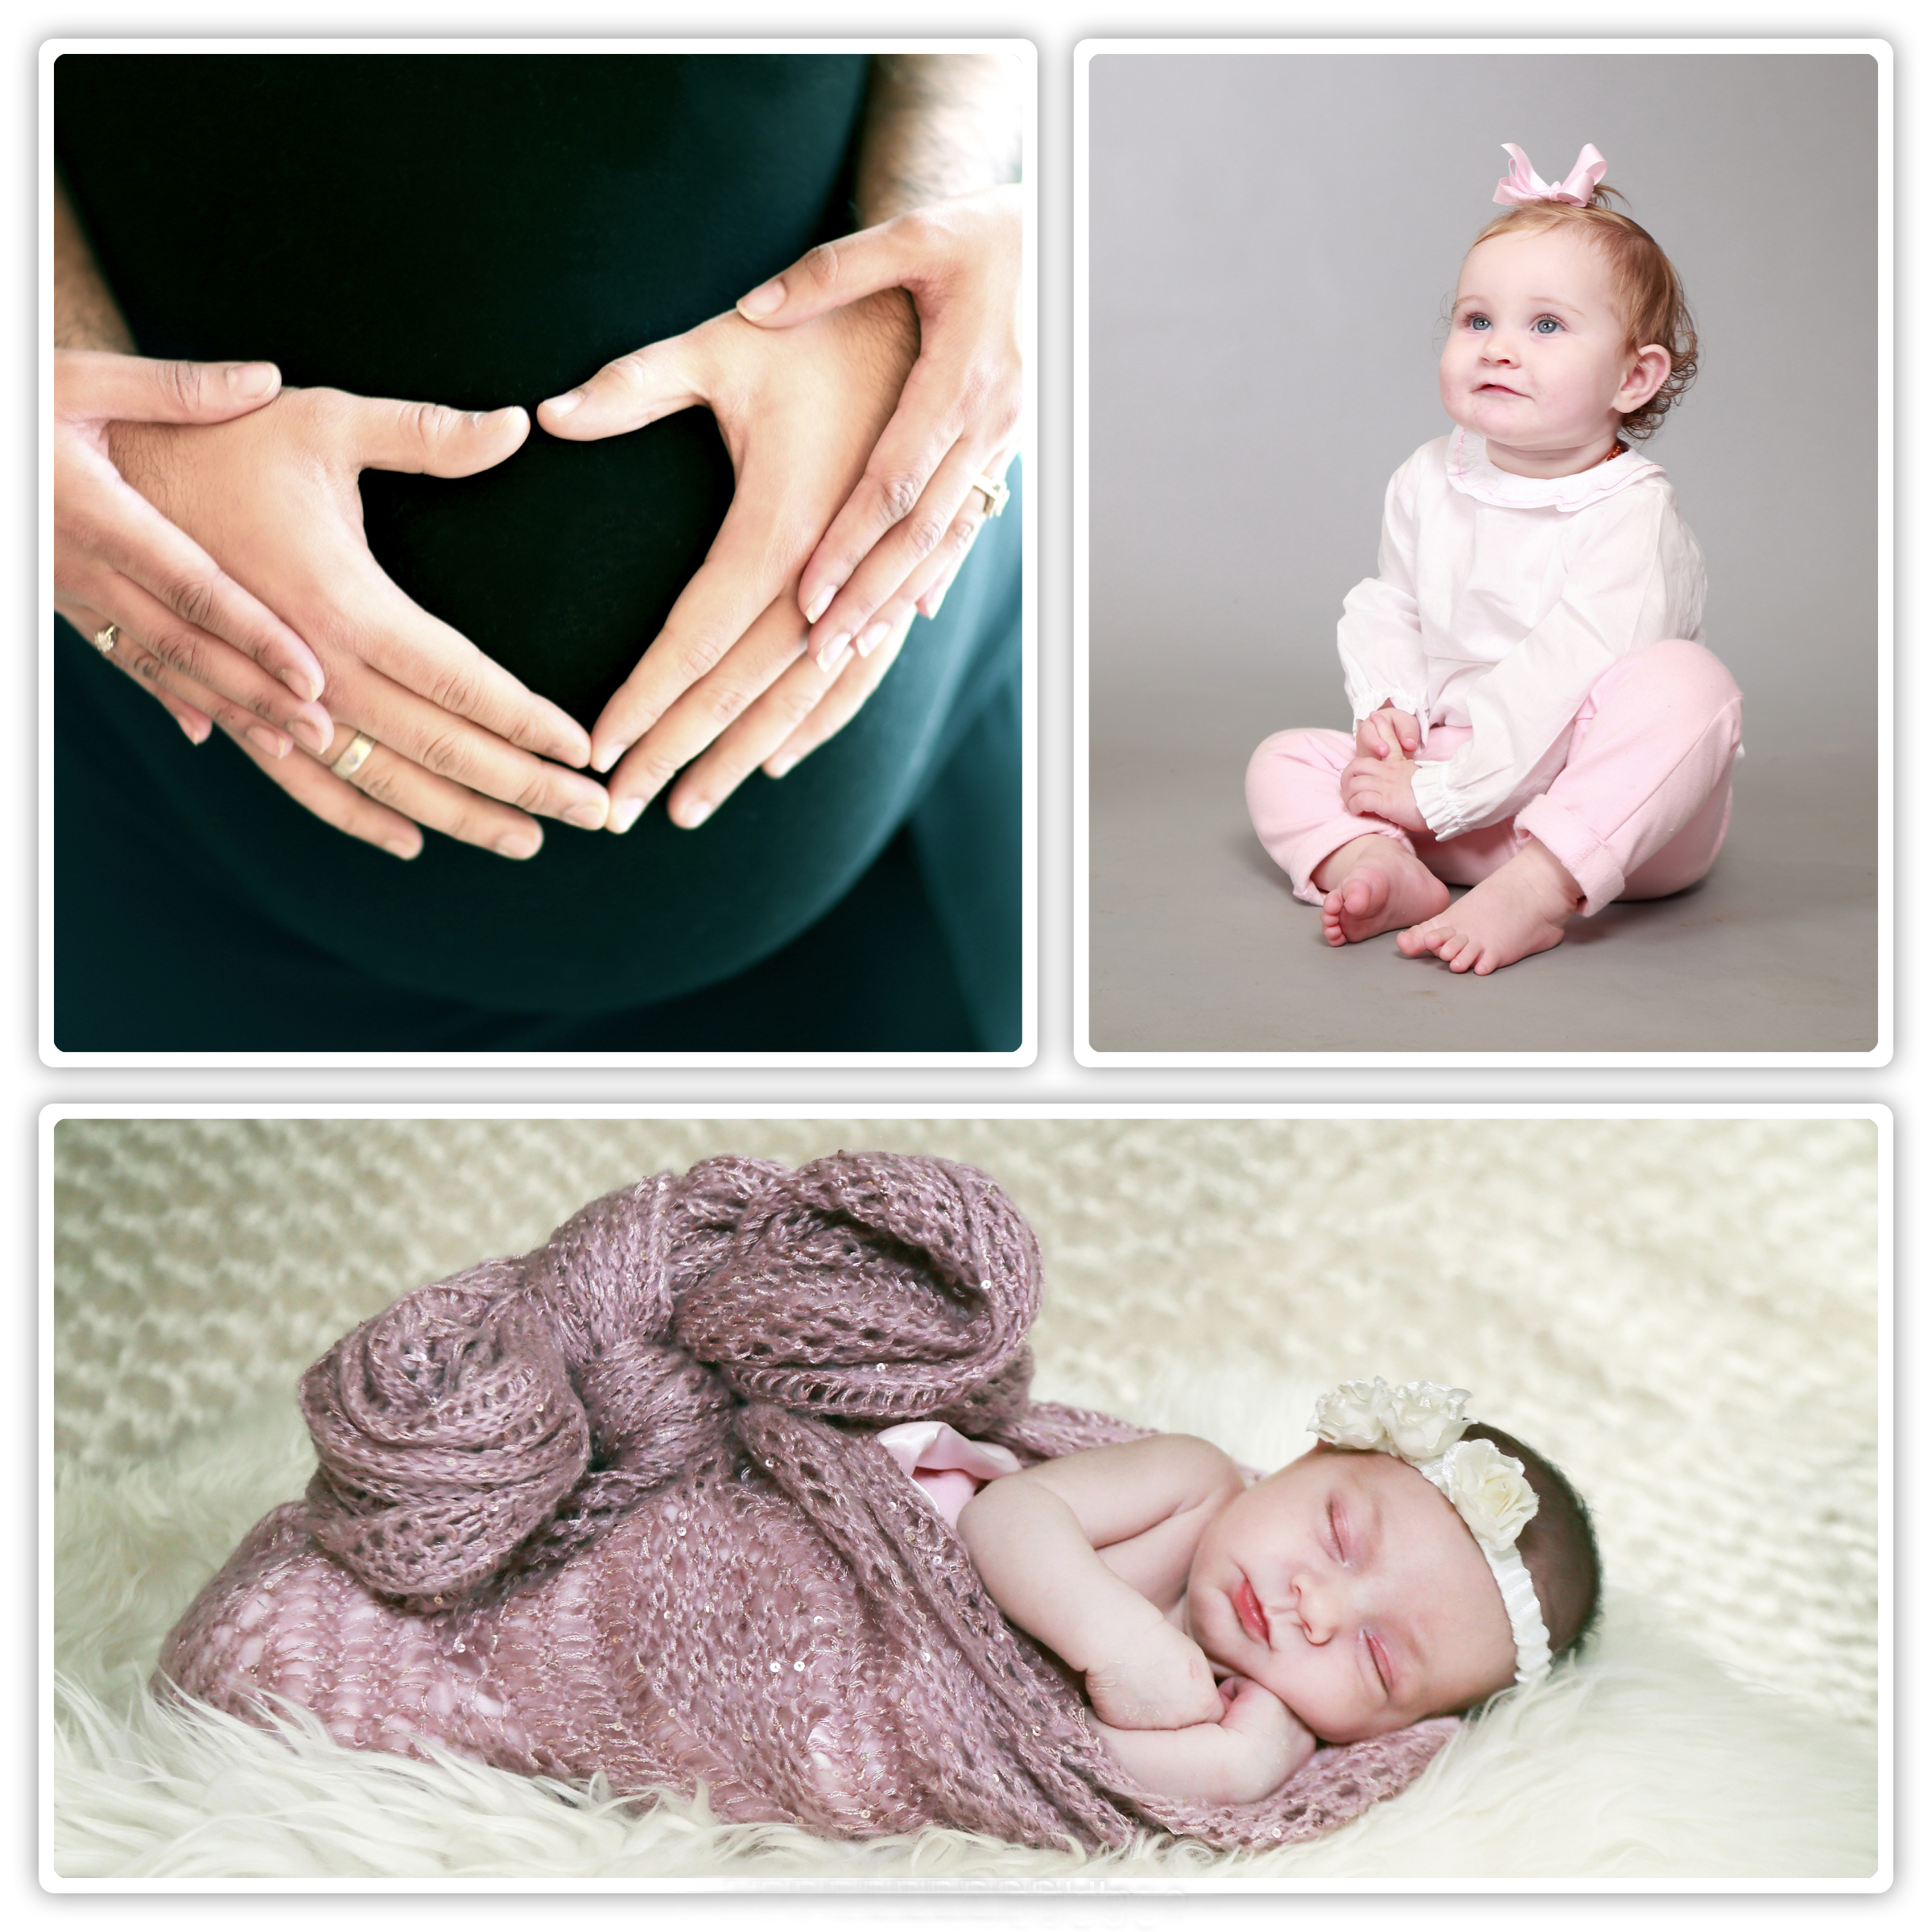 Collage of maternity photography and baby photographs